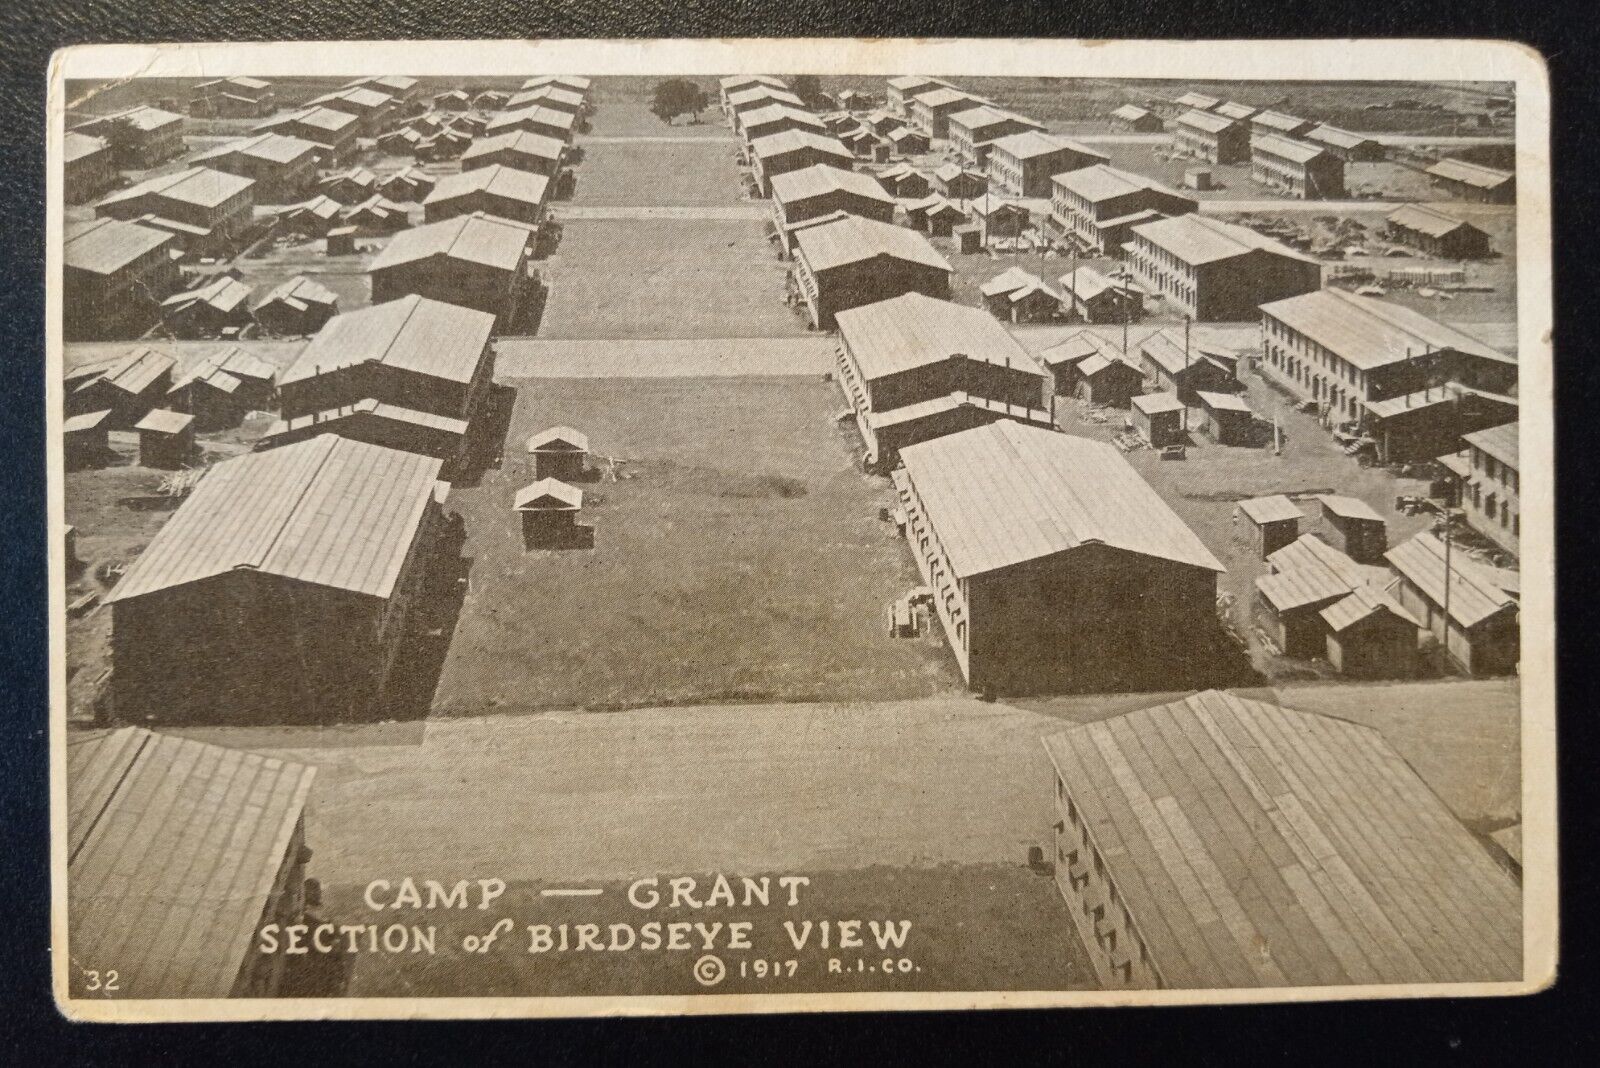 1917 WWI CAMP GRANT SECTION OF BIRDSEYE VIEW US Army Postcard Antique 